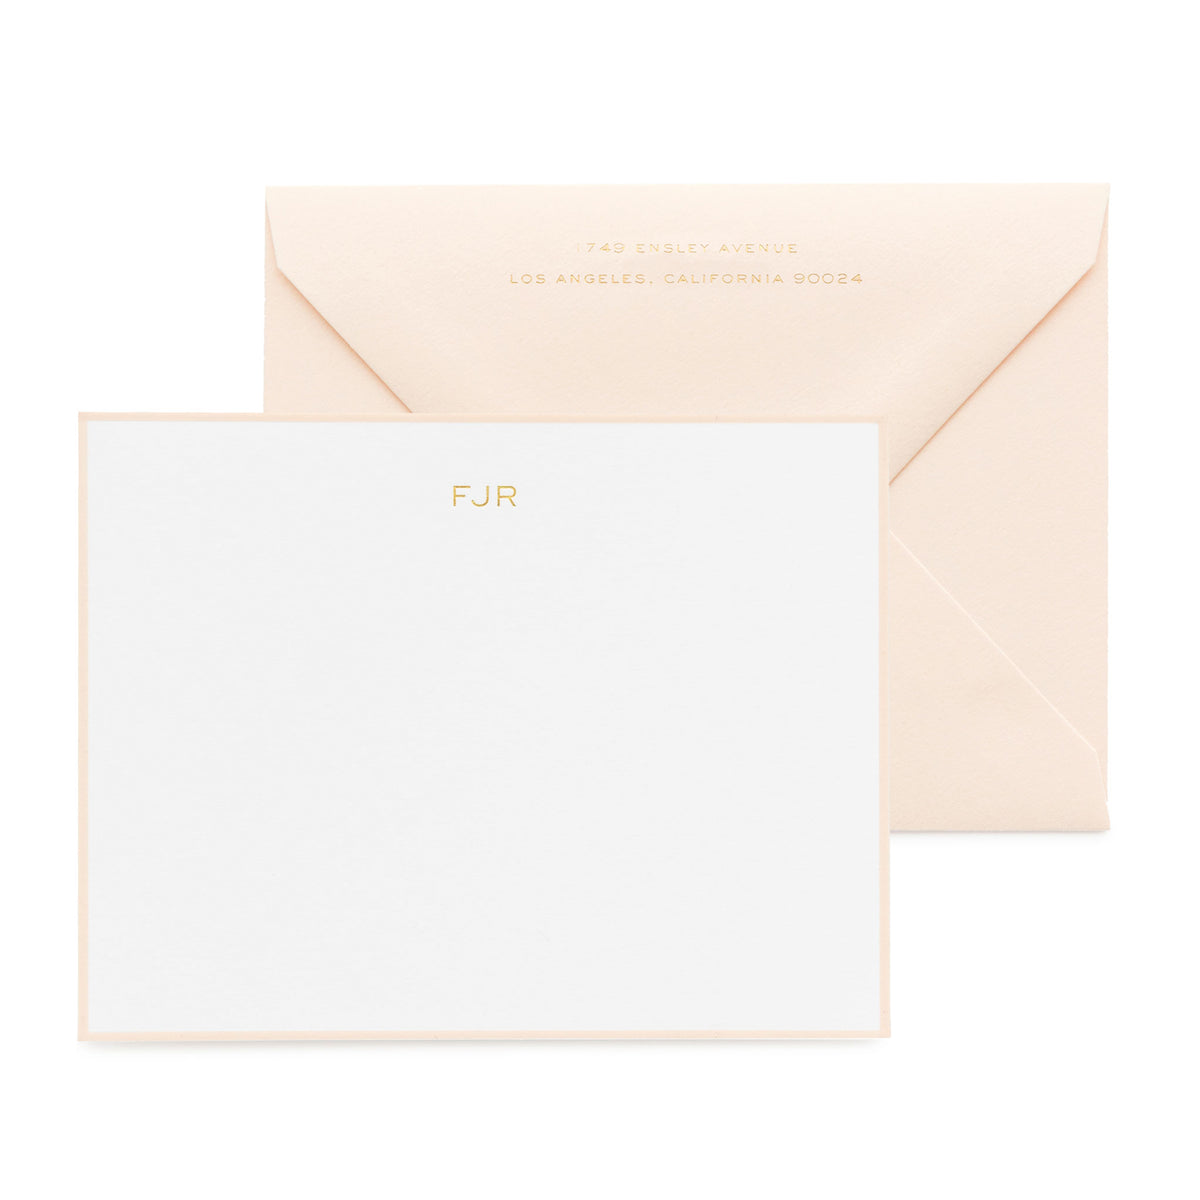 Pale pink personalized stationery set with gold foil initials